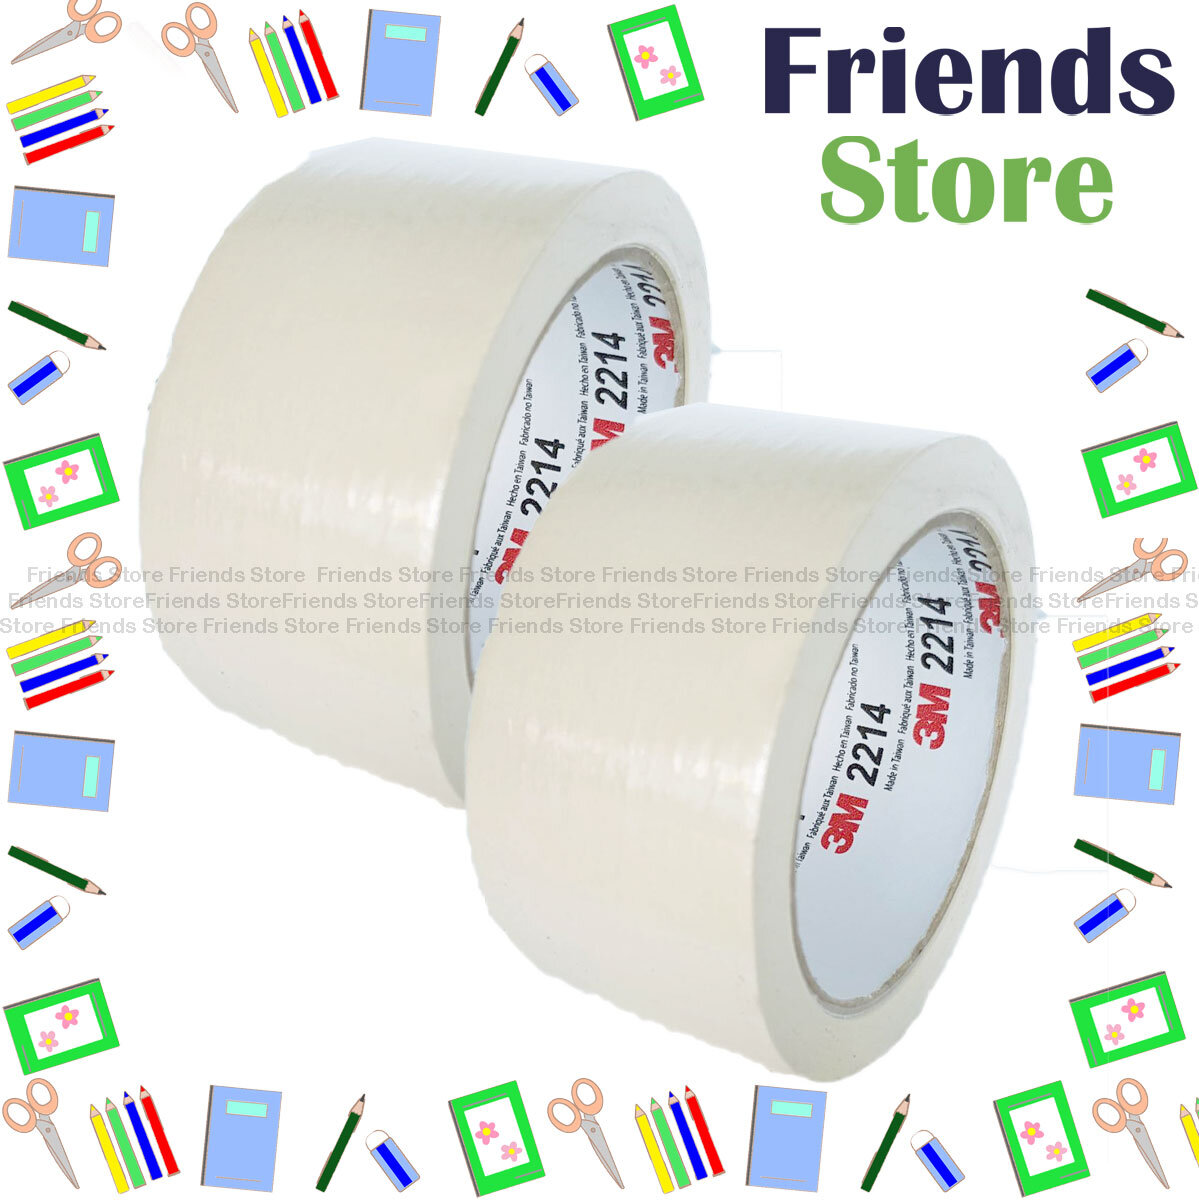 3M 469 Red Double Coated Double Sided Tape, 2 Wide x 60 Yard Roll 